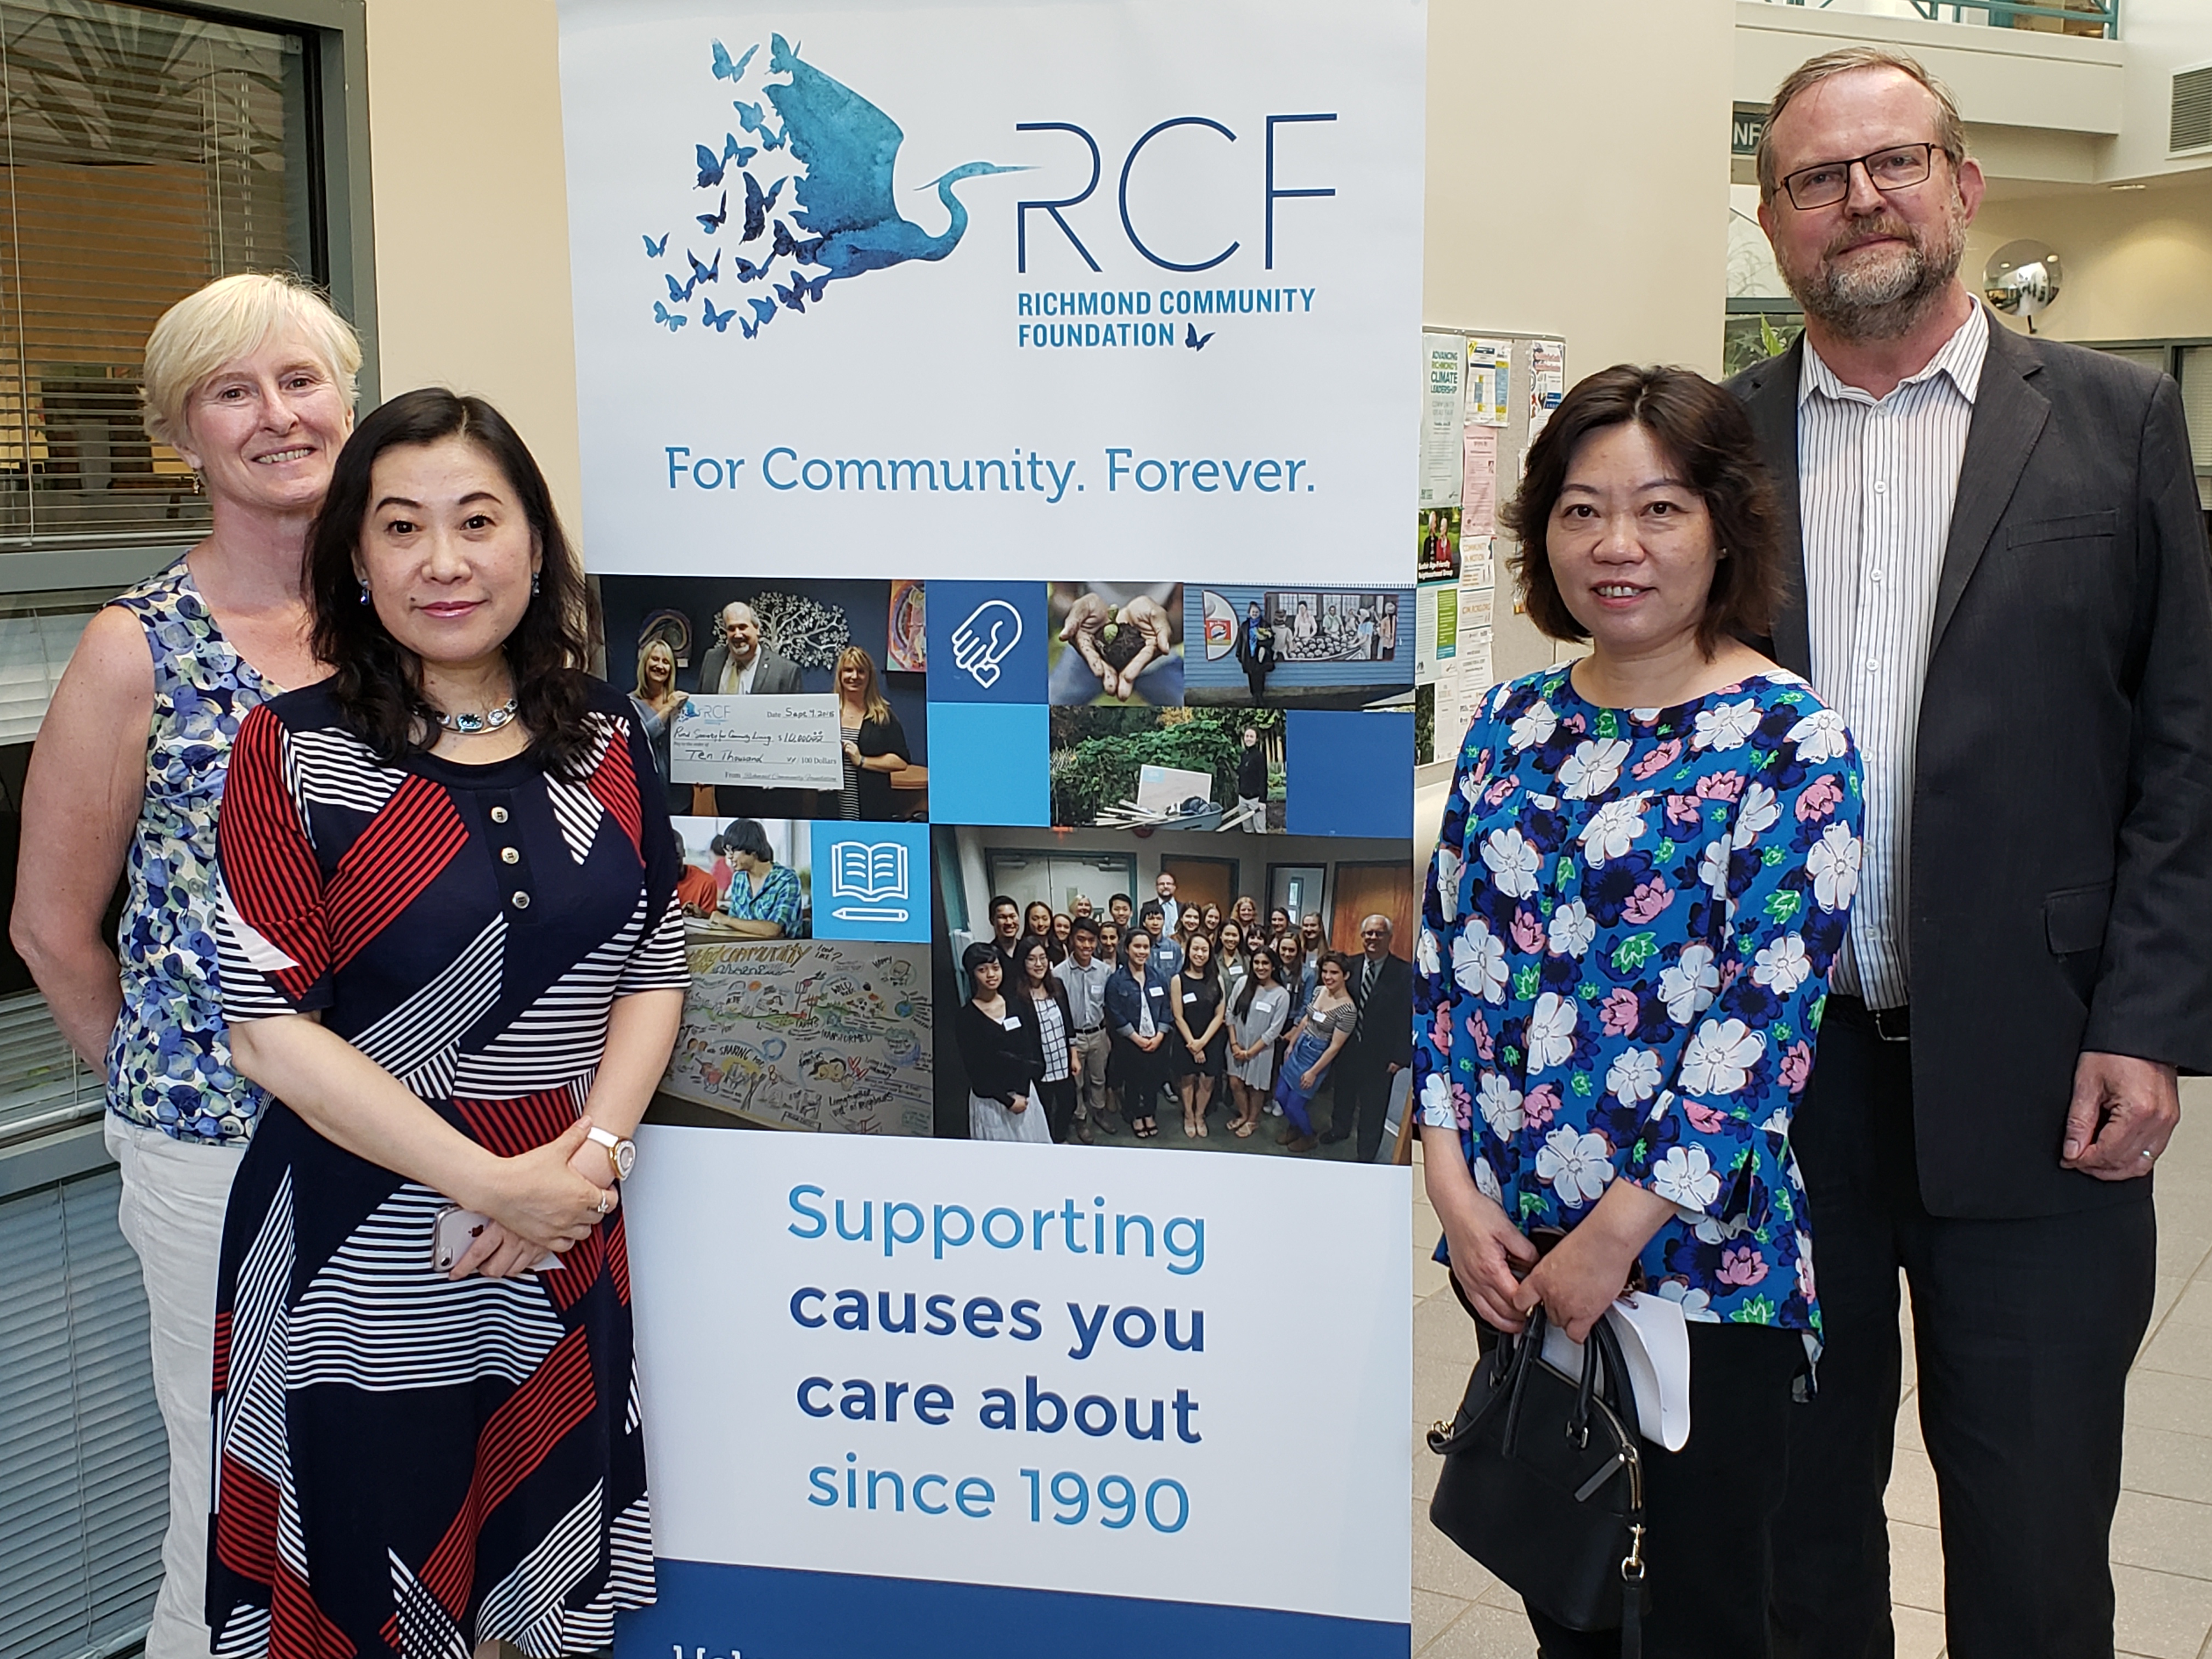 Three Women and One Man Standing Next to Richmond Community Foundation Banner